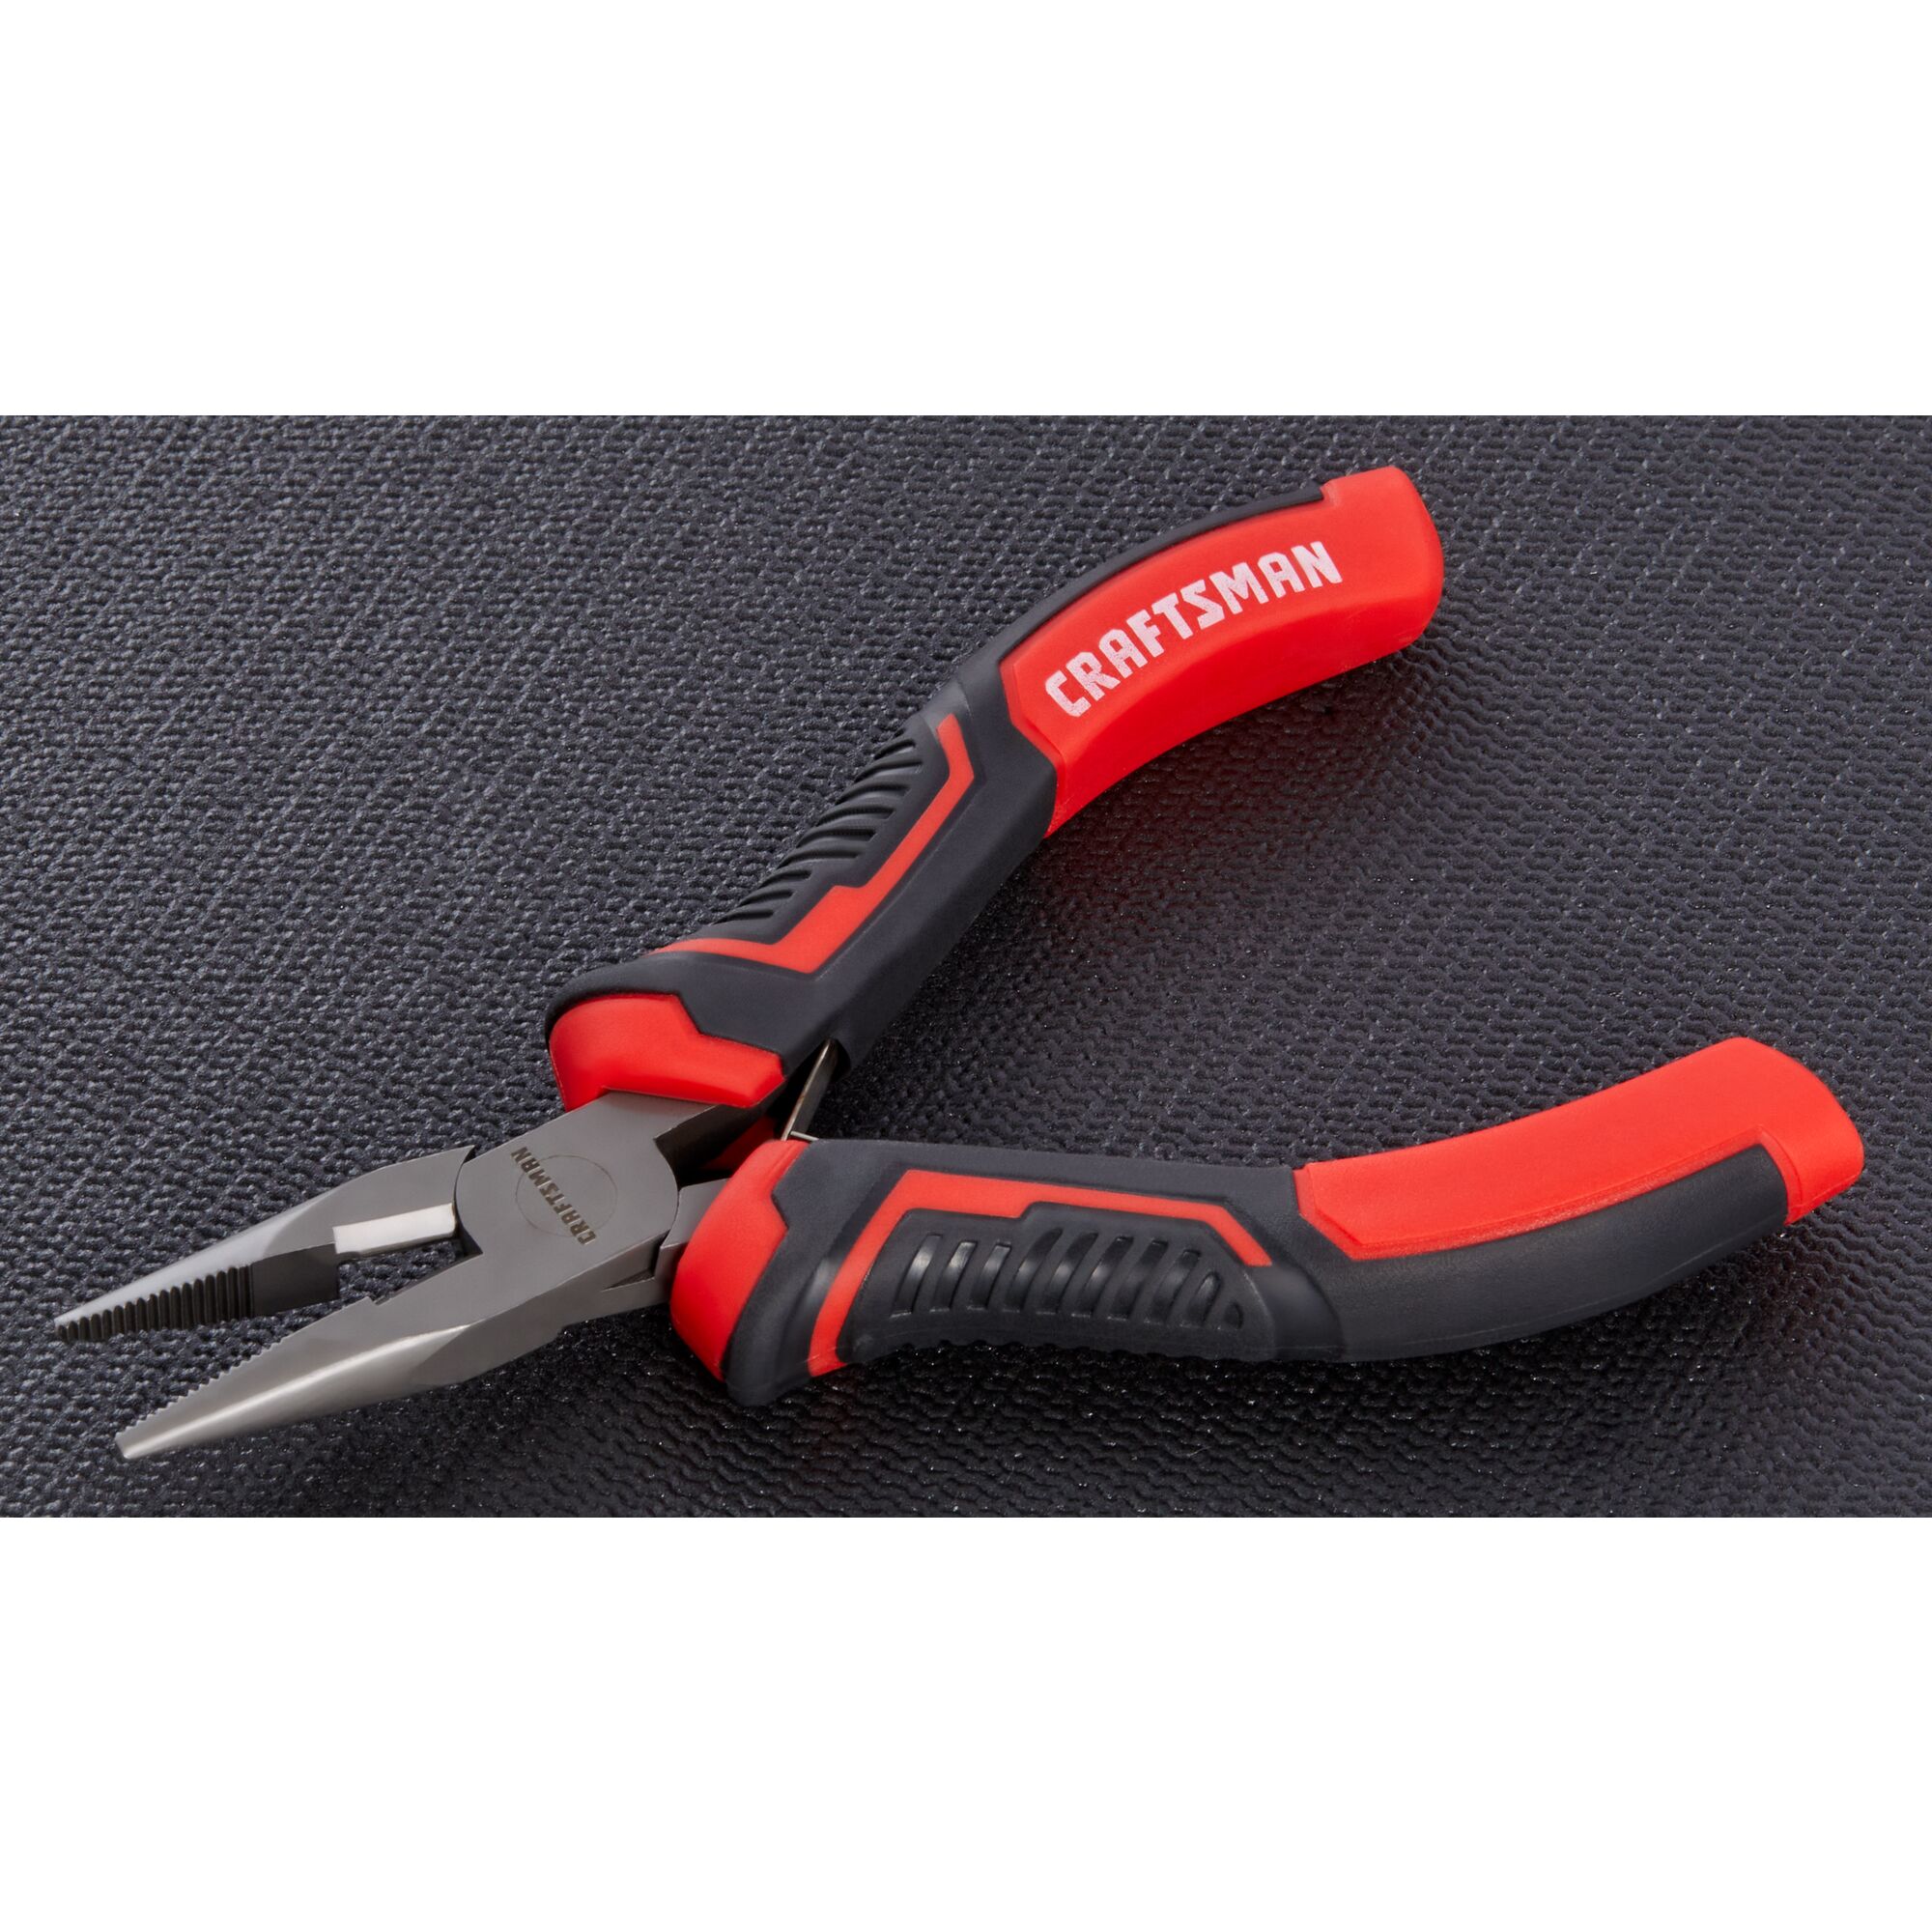 CRAFTSMAN 6-Pack Assorted Pliers with Soft Case at